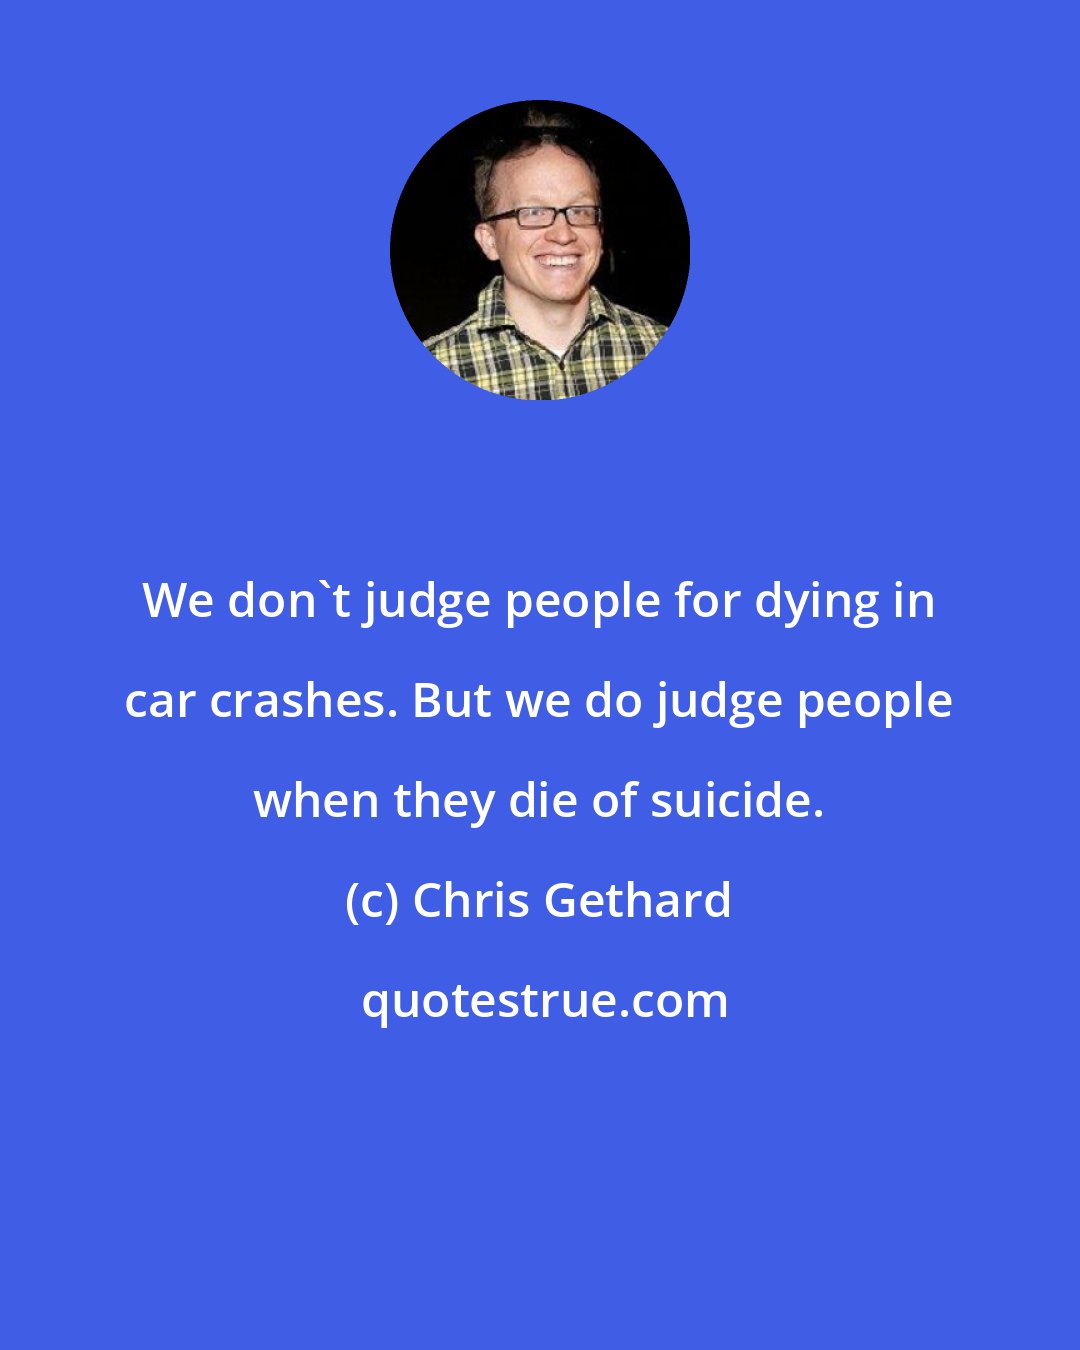 Chris Gethard: We don't judge people for dying in car crashes. But we do judge people when they die of suicide.